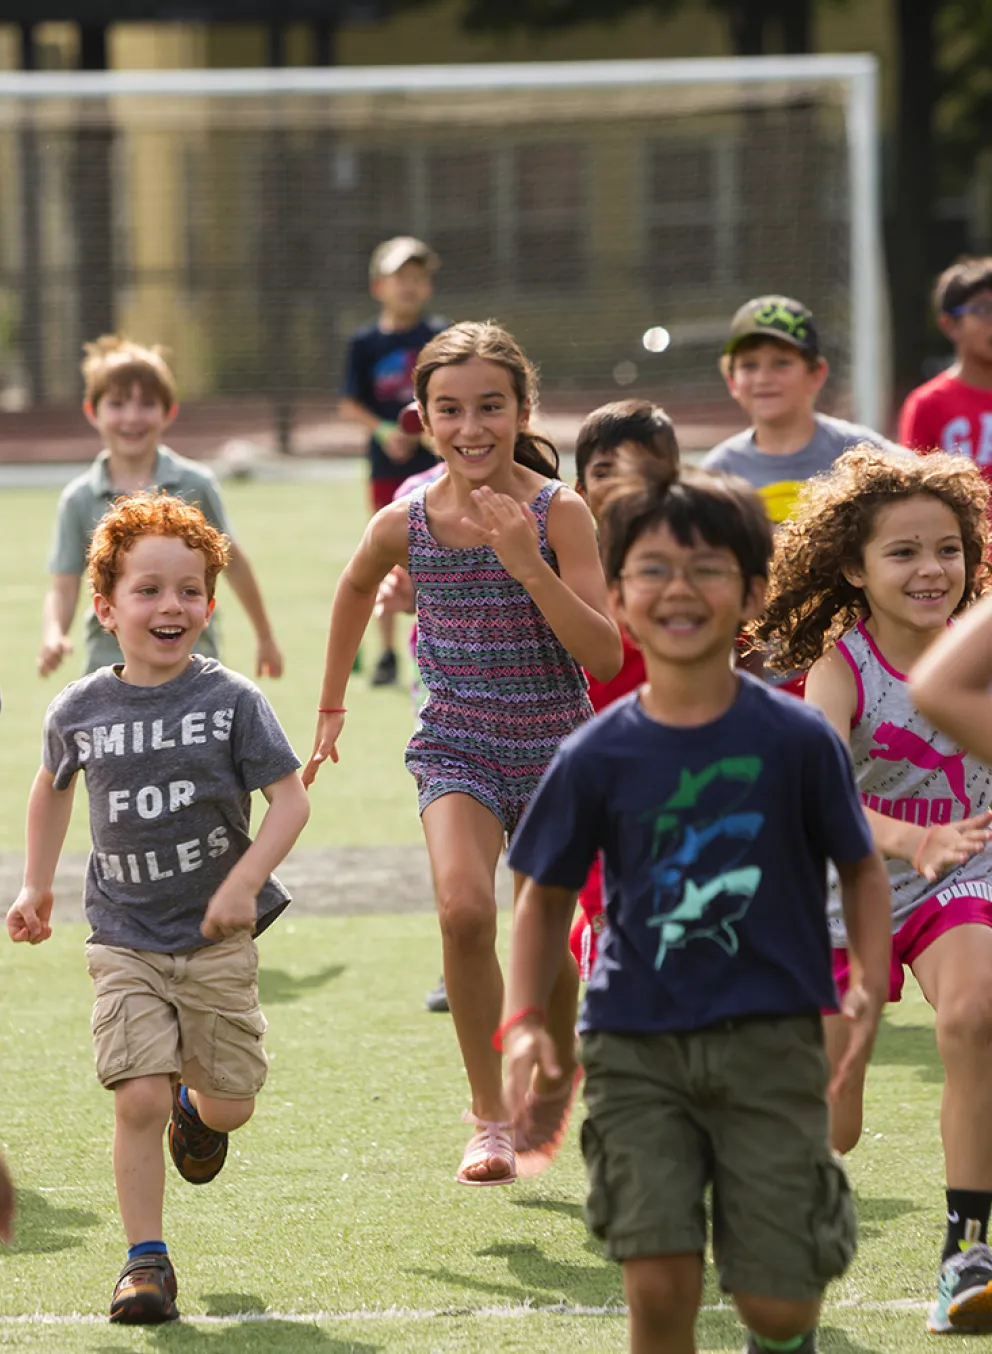 A group of school-age kids run across a field laughing and smiling